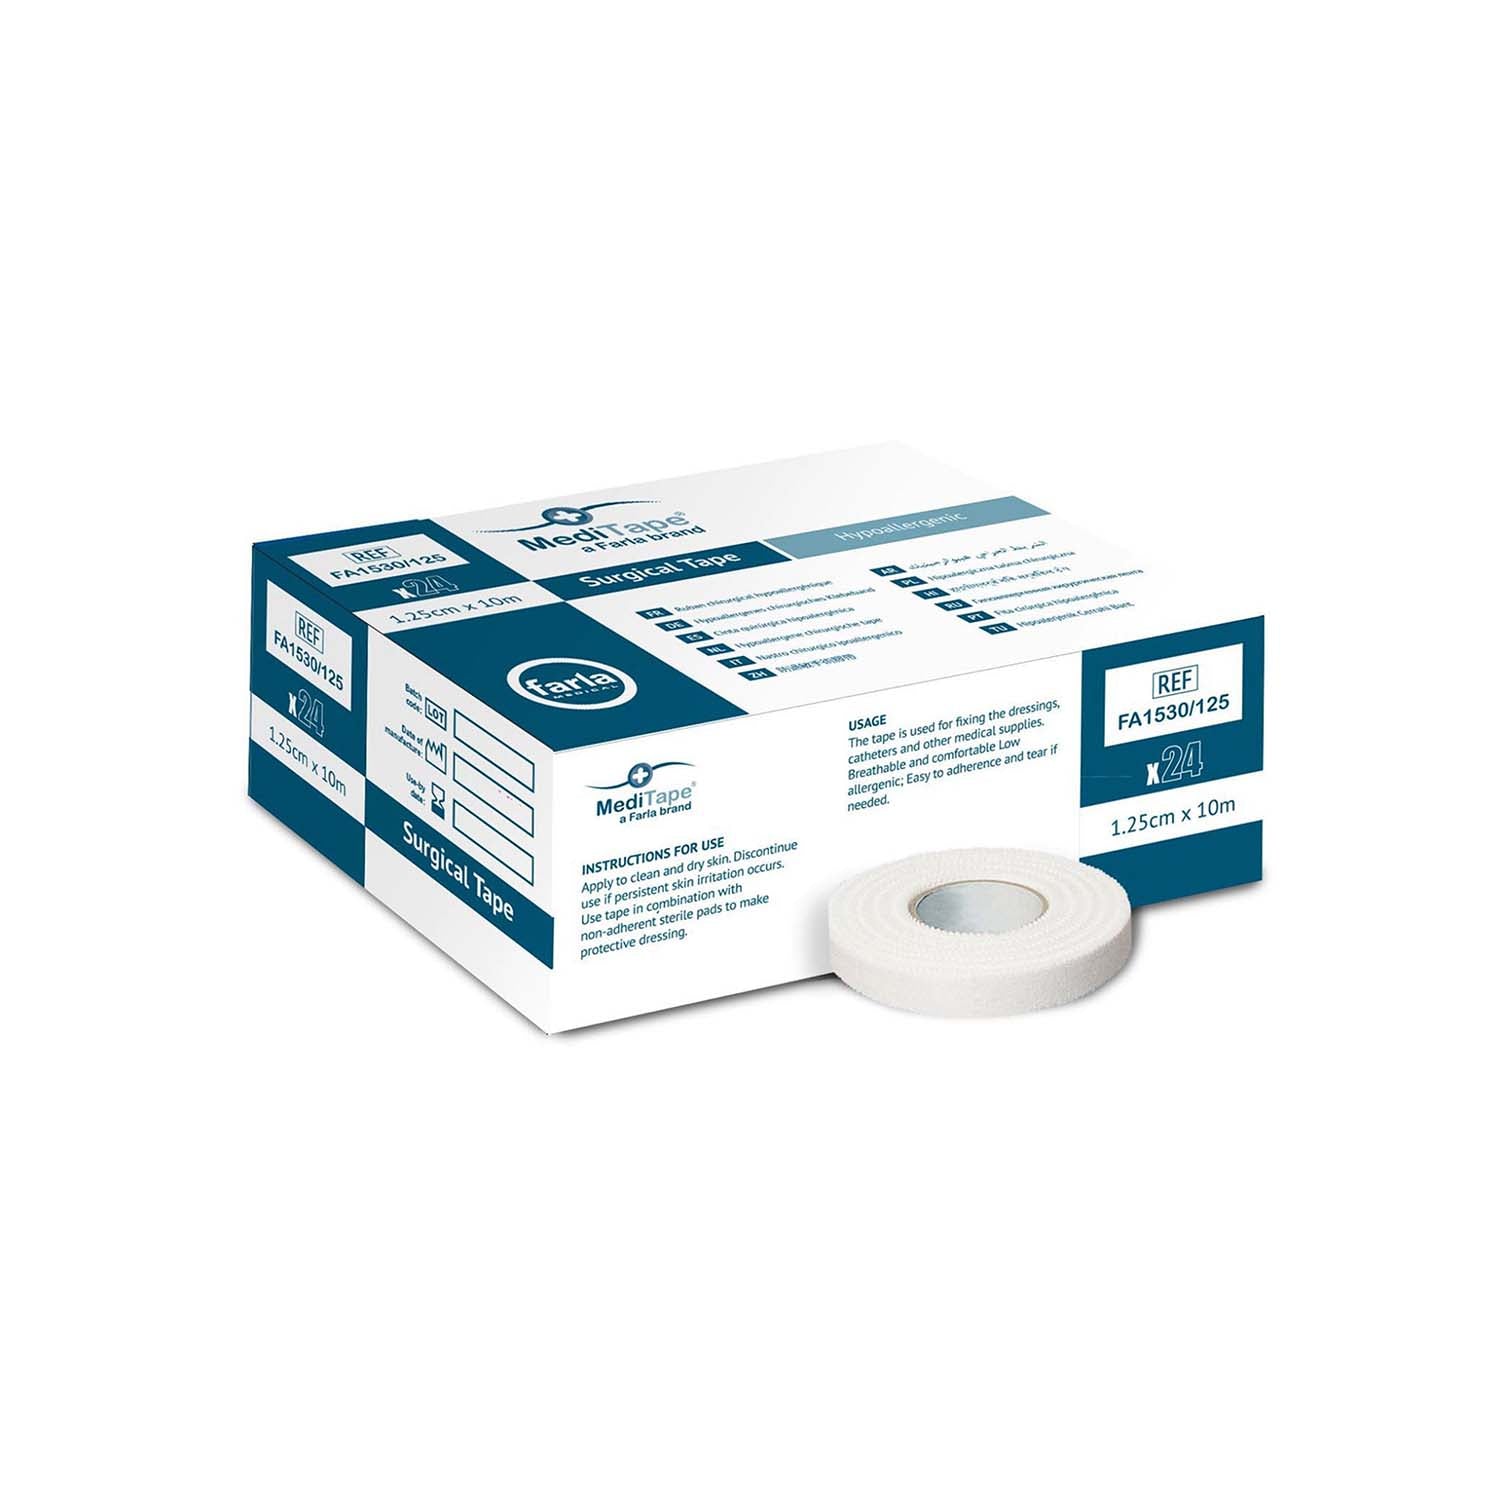 MediTape Hypoallergenic Surgical Tape | 1.25cm x 10m | Pack of 24